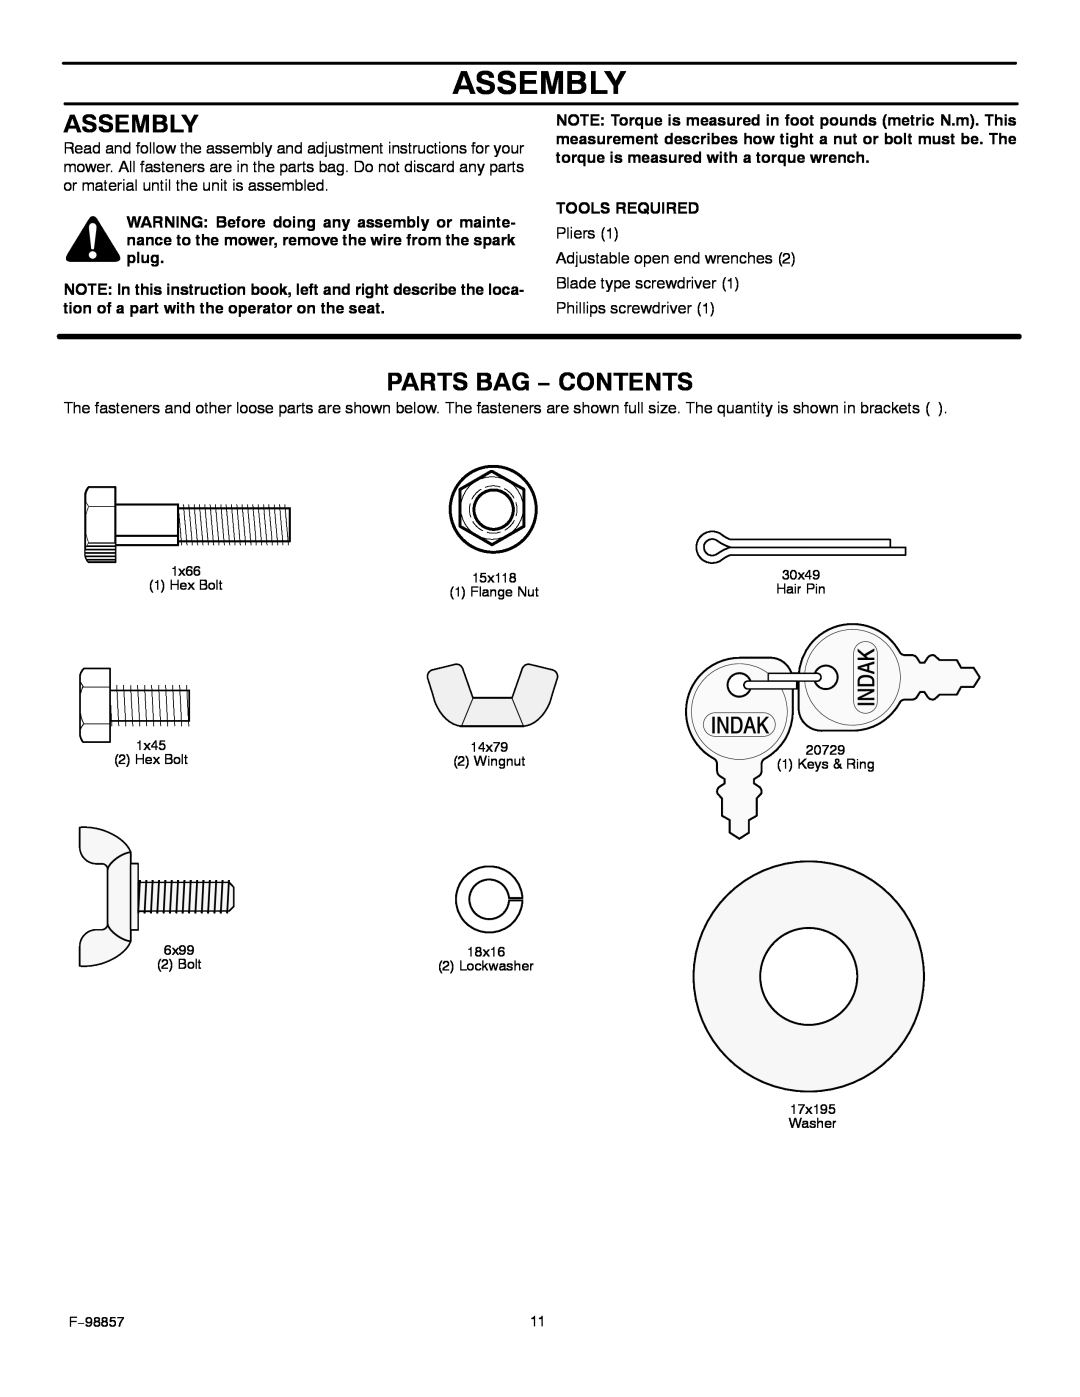 Hayter Mowers 30-Dec manual Assembly, Parts Bag − Contents 